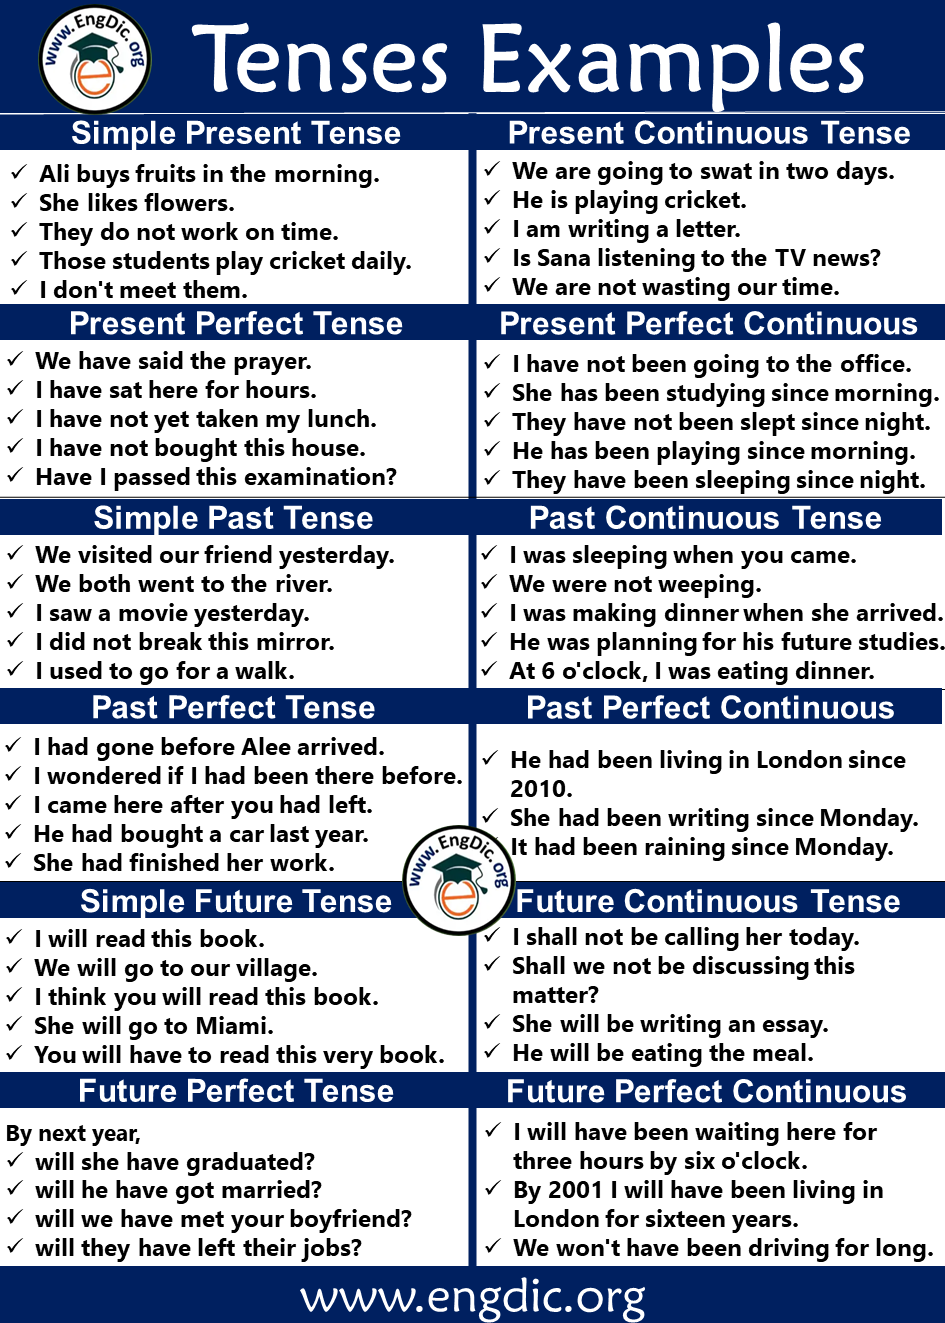 Examples of Tenses